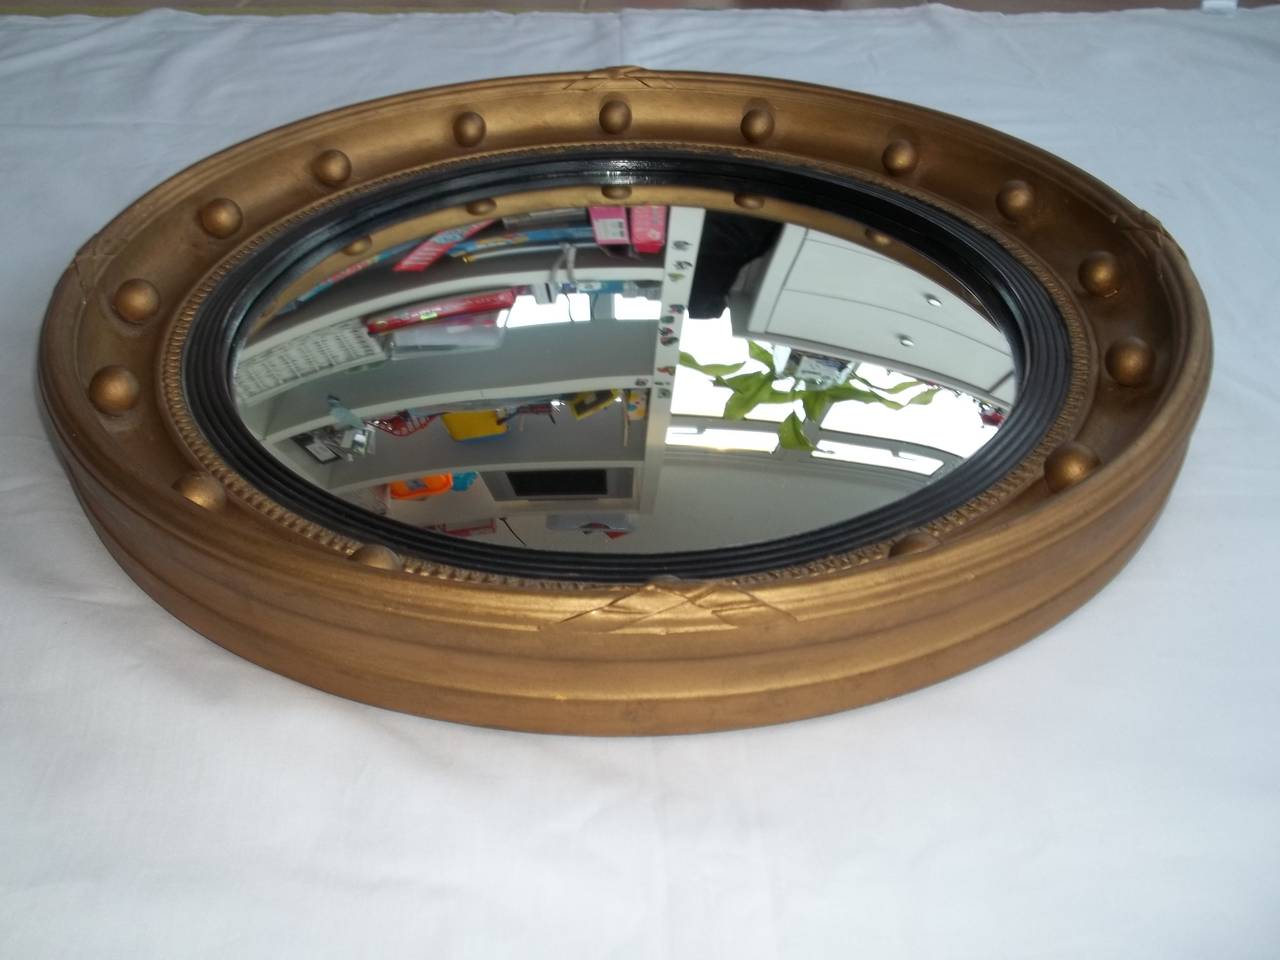 This is a good Circular Gilt Mirror in a popular Georgian Style. 

The frame is circular with a round gilt frame having good ball and ribbon detail.
The mirror has a circular hanging ring to the back

The CONVEX mirror glass is in good